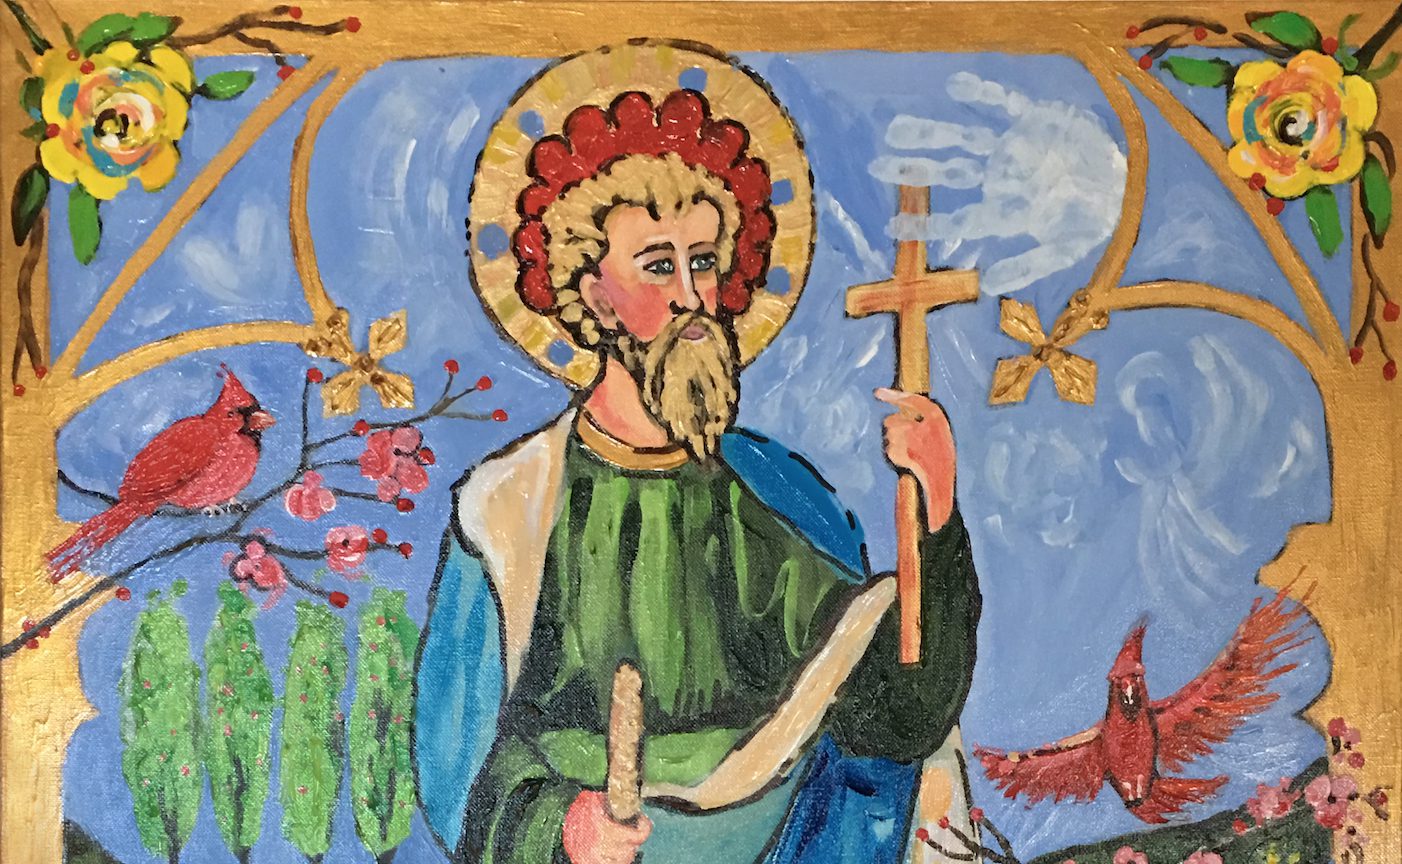 Young Artist Honors Saint Jude